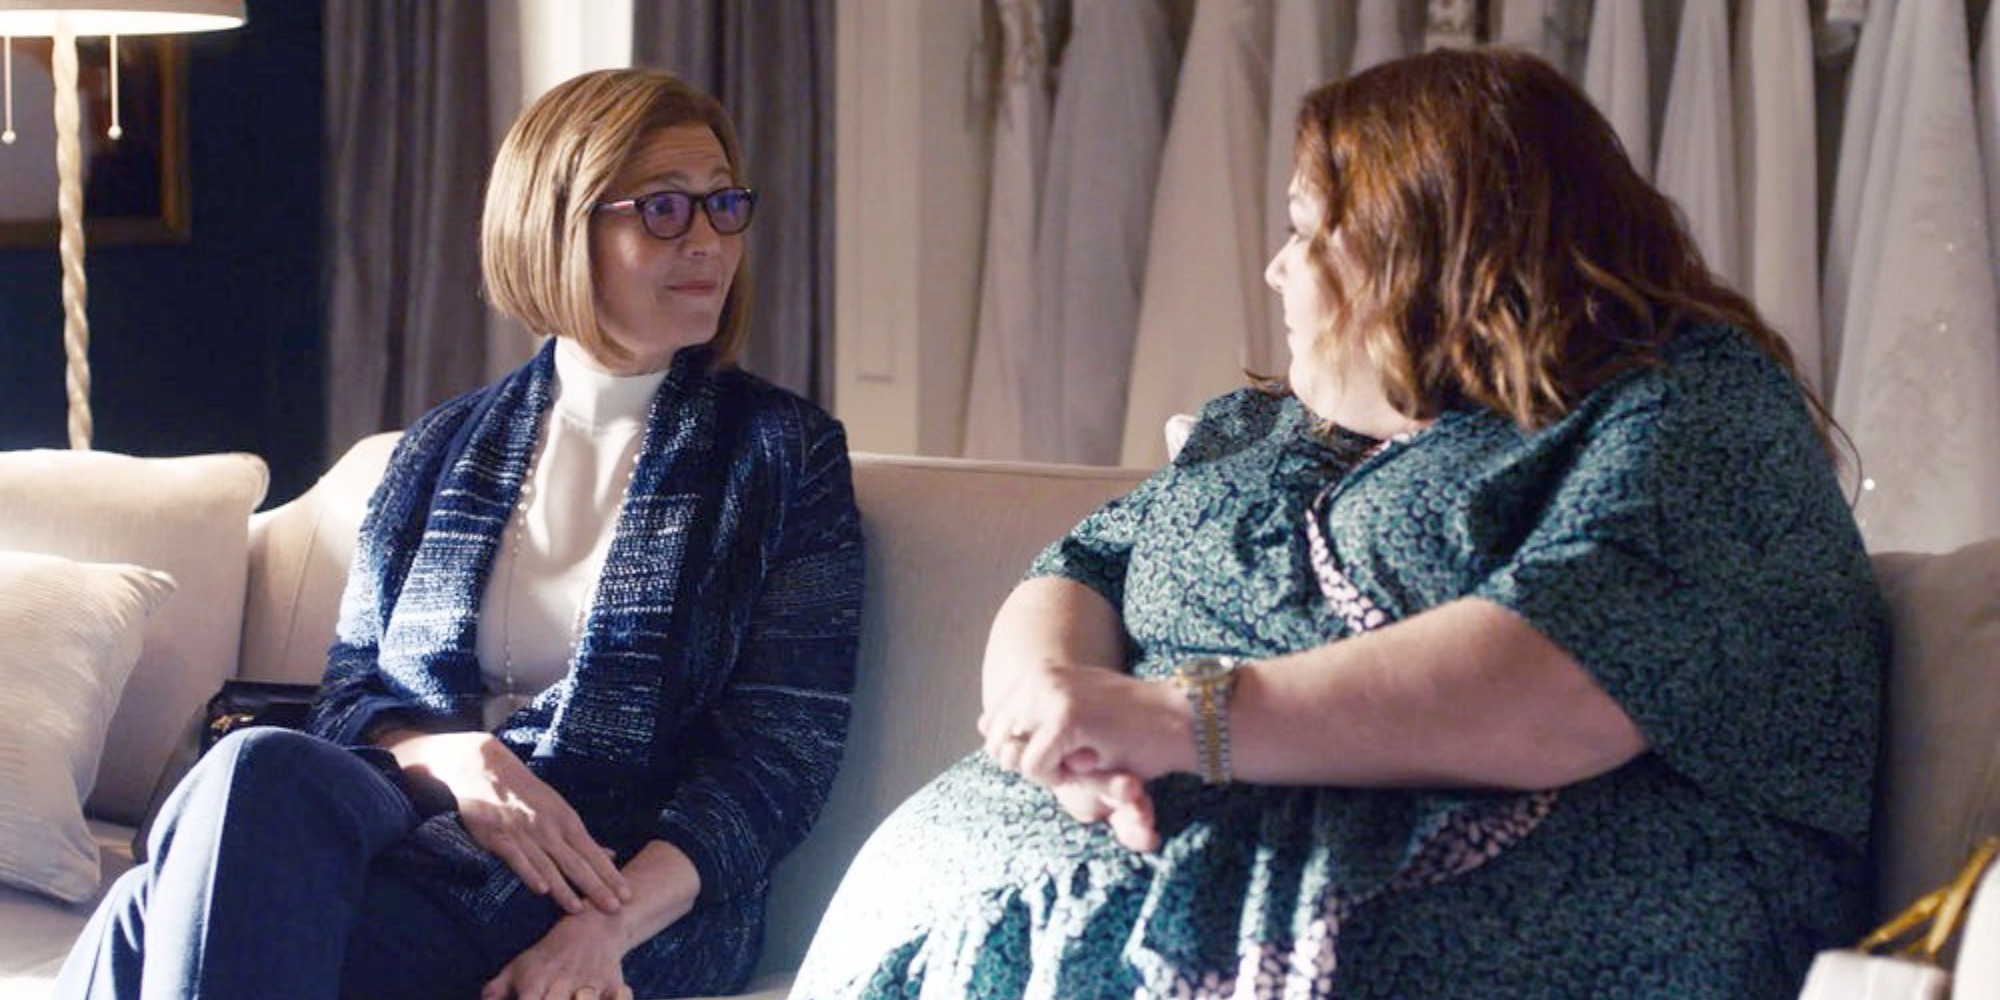 Mandy Moore and Chrissy Metz during a scene from NBC's "This Is Us."